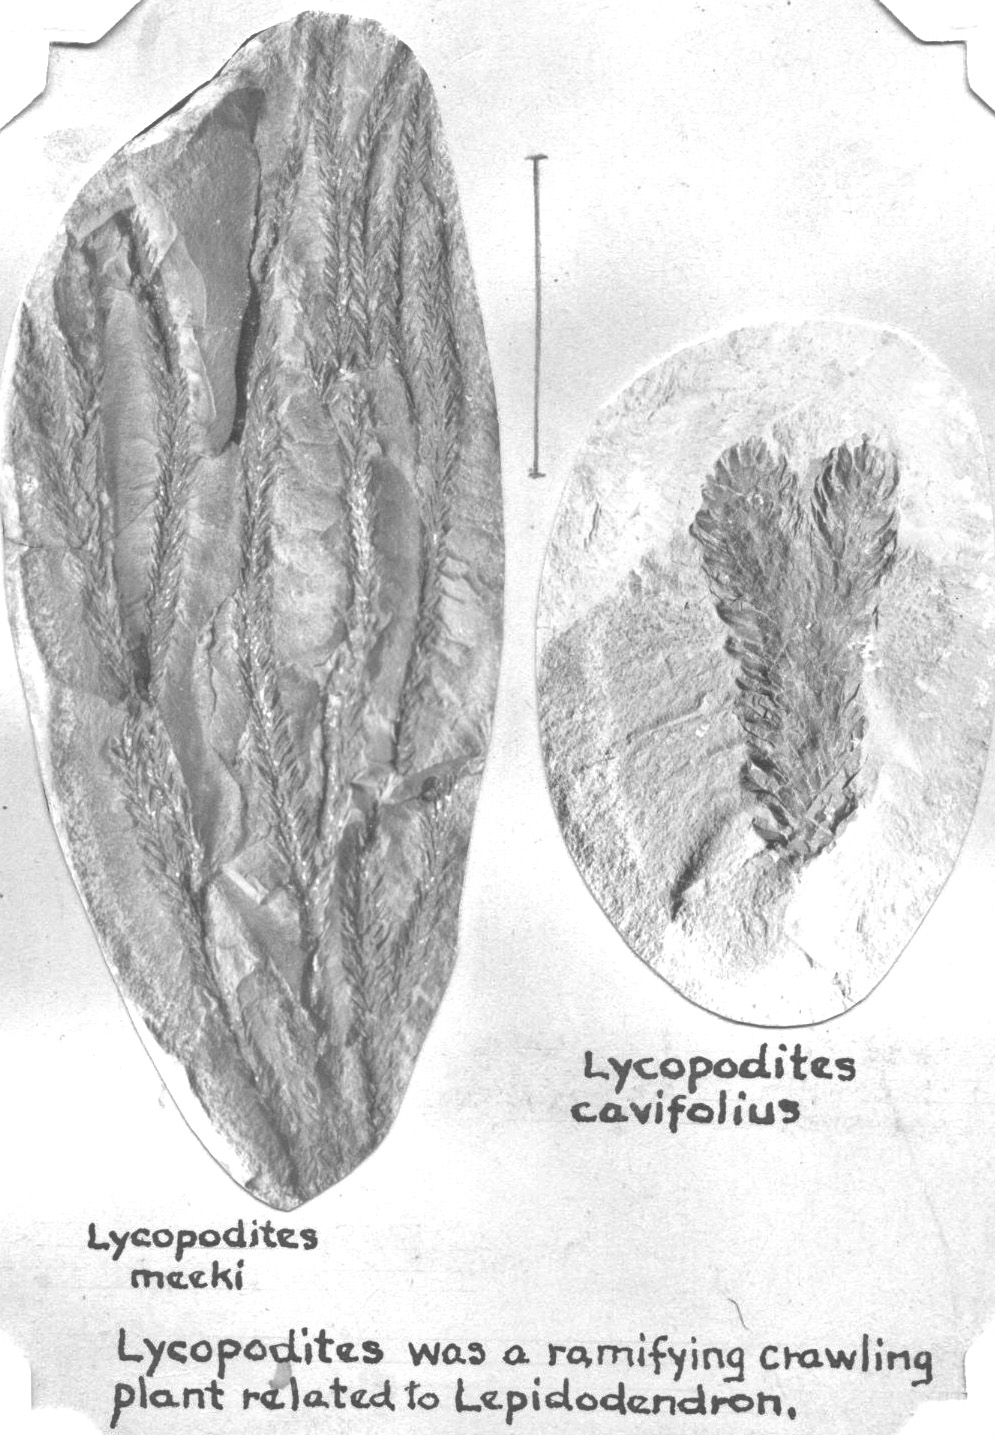 Lycopodites mecki and Lycopodites cavifolius, photographs by GL, page 32